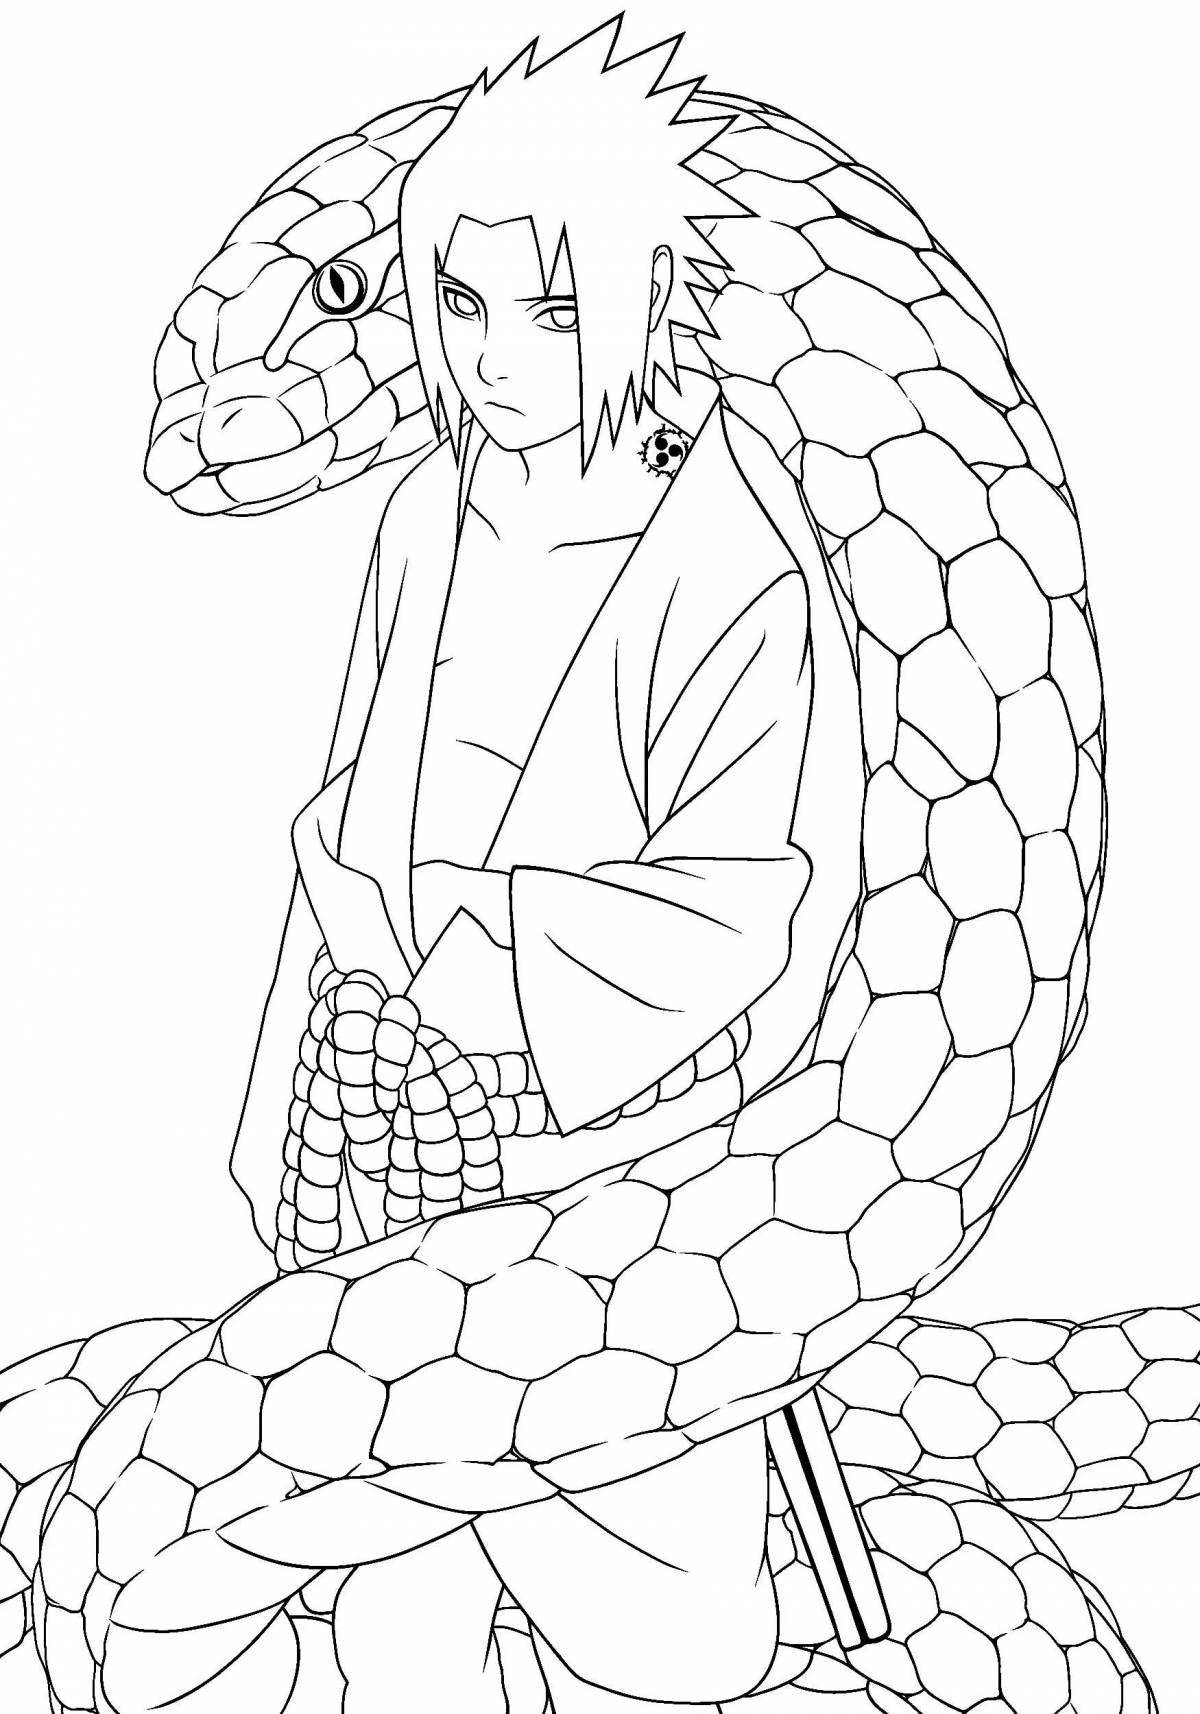 Fairy naruto anime coloring page